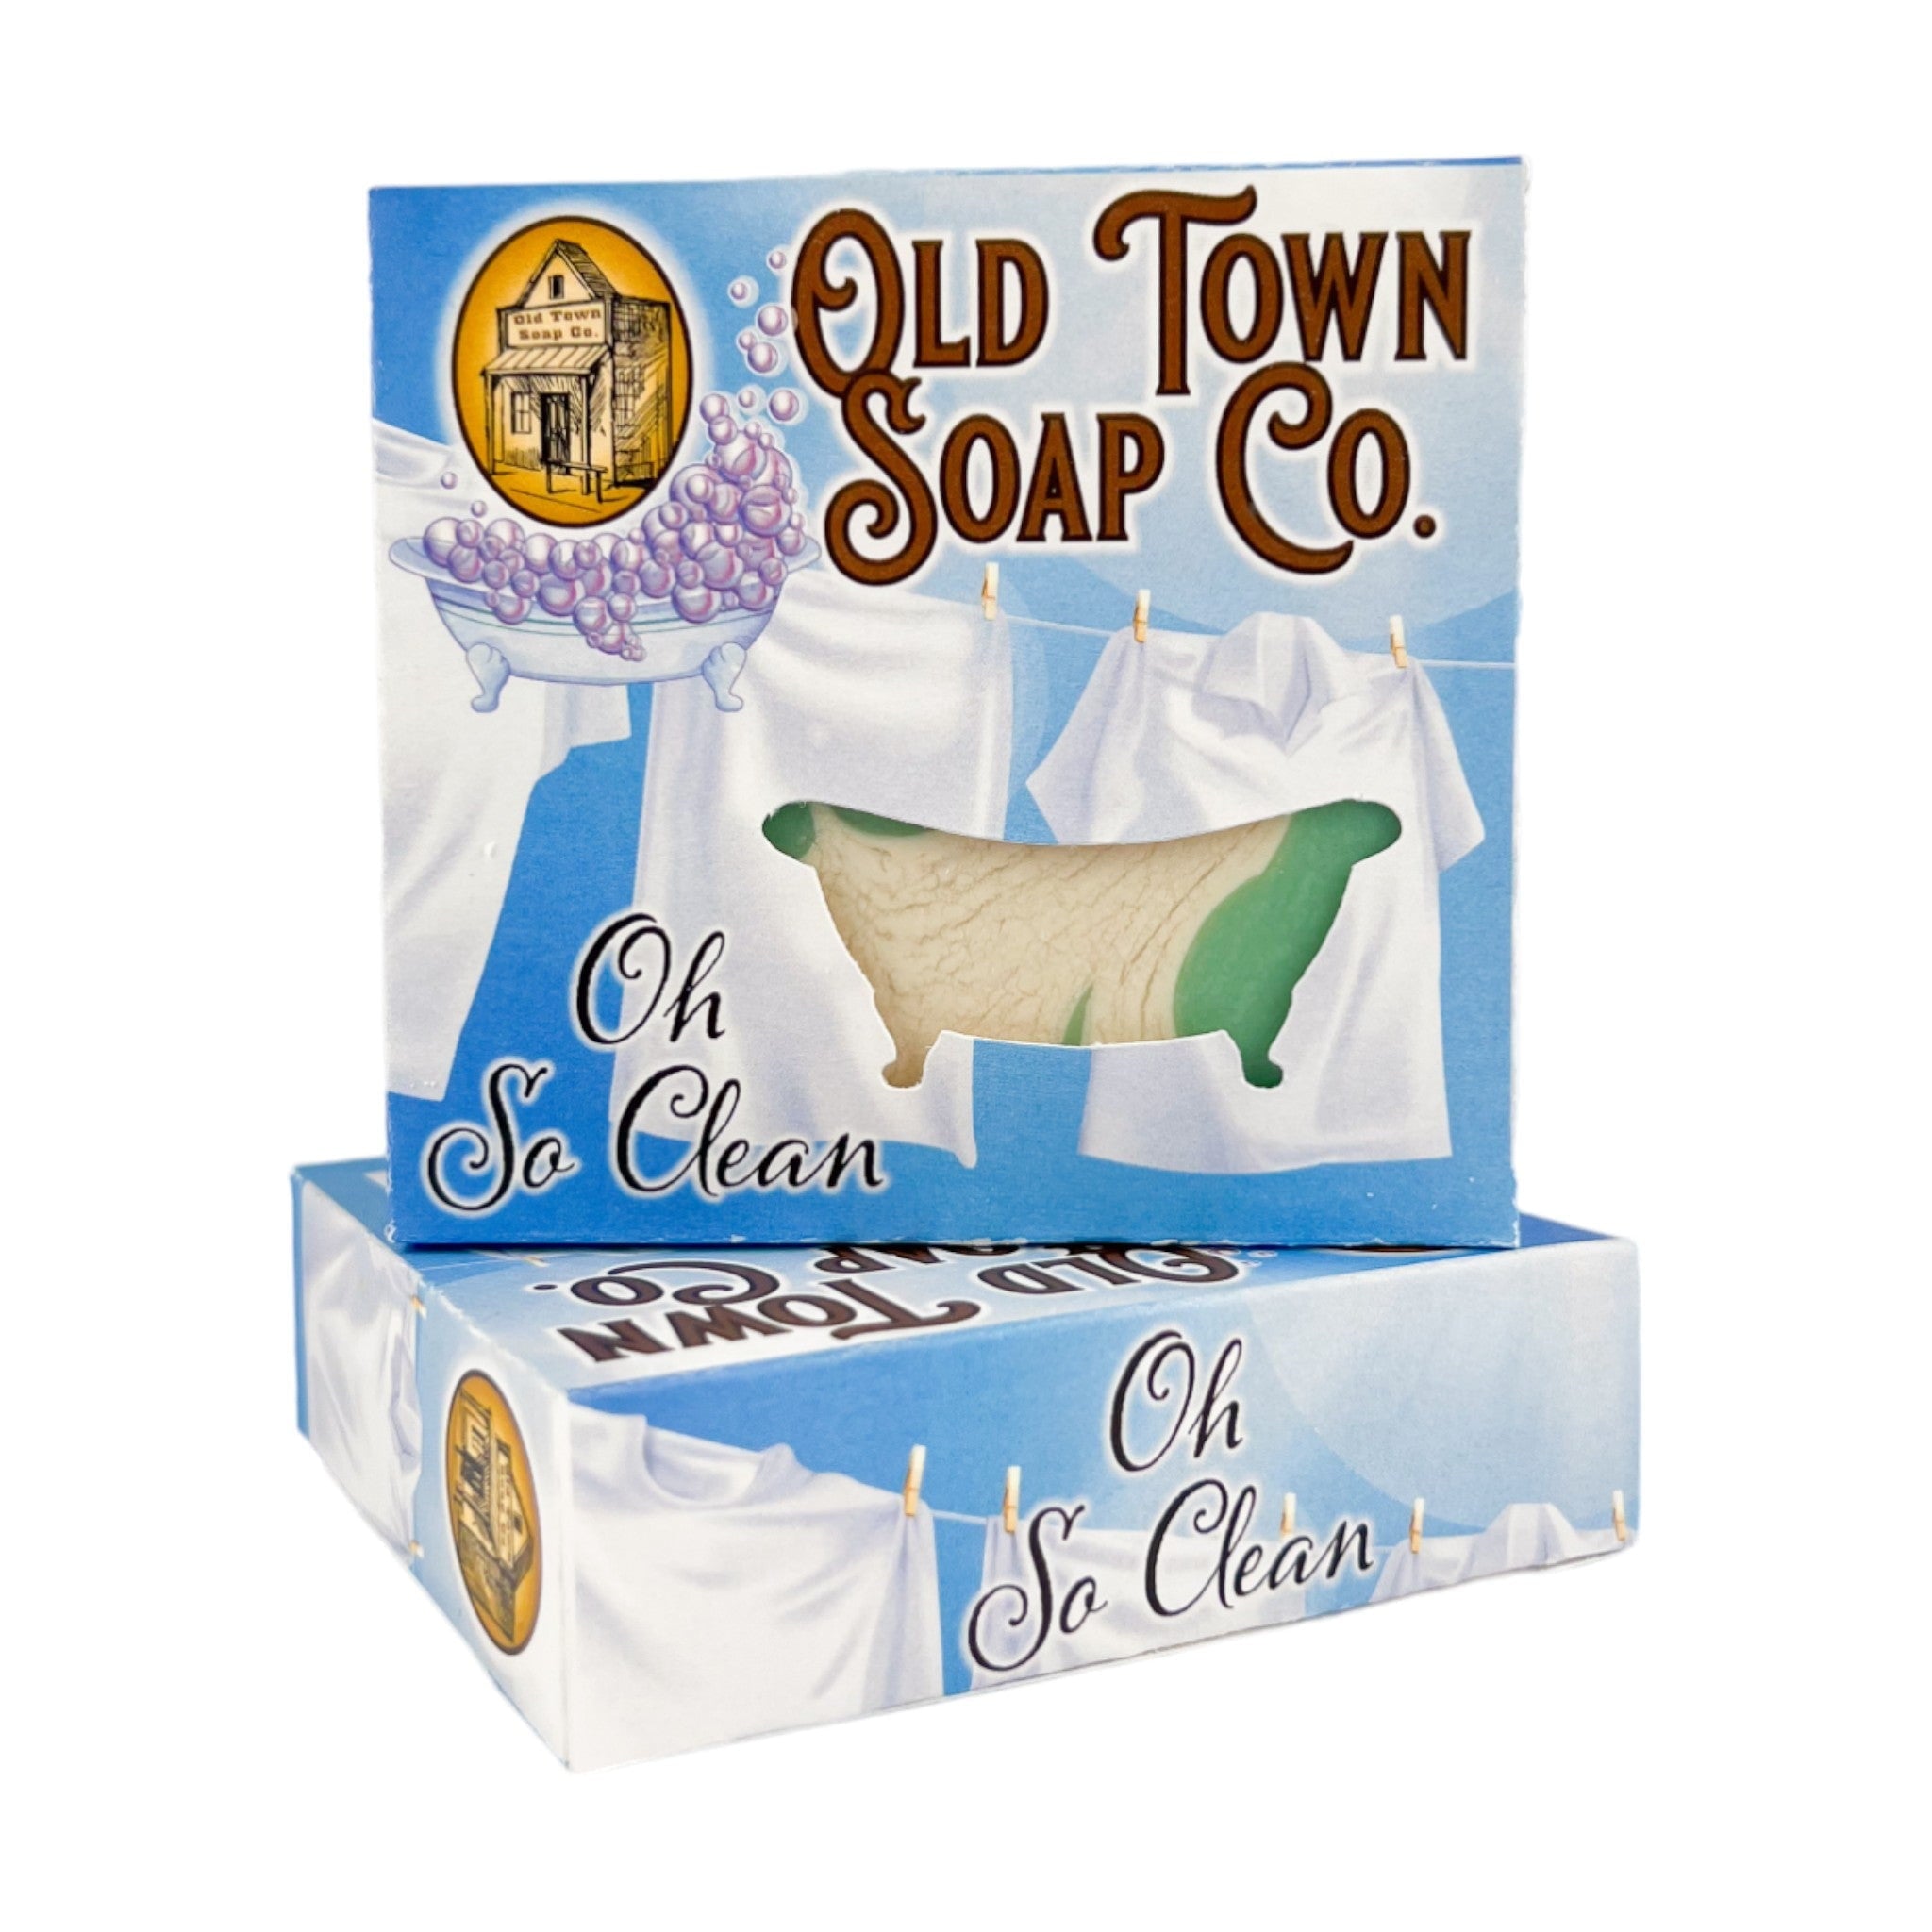 Oh So Clean -Bar Soap - Old Town Soap Co.